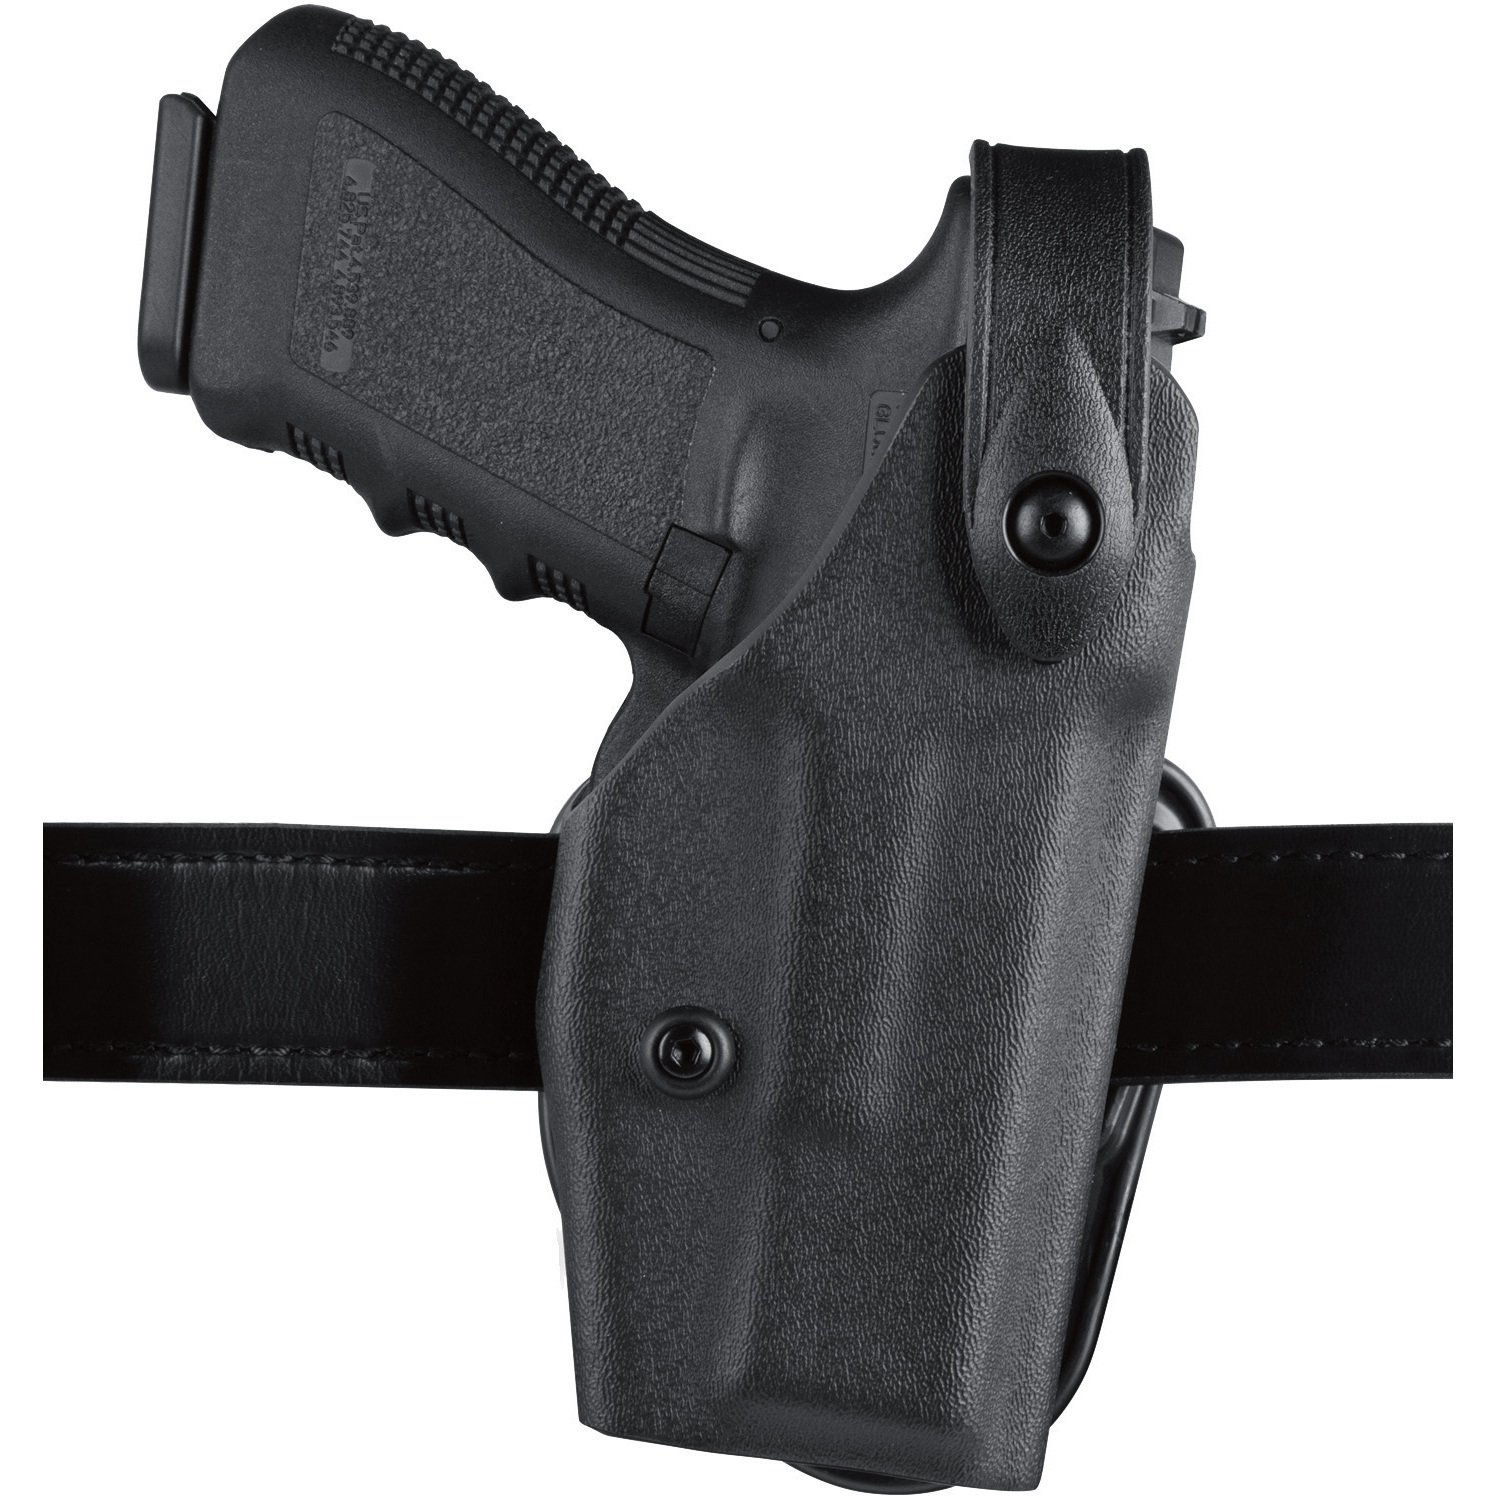 Safariland 6005-11 Quick Release Leg Strap Only (Includes Buckle)